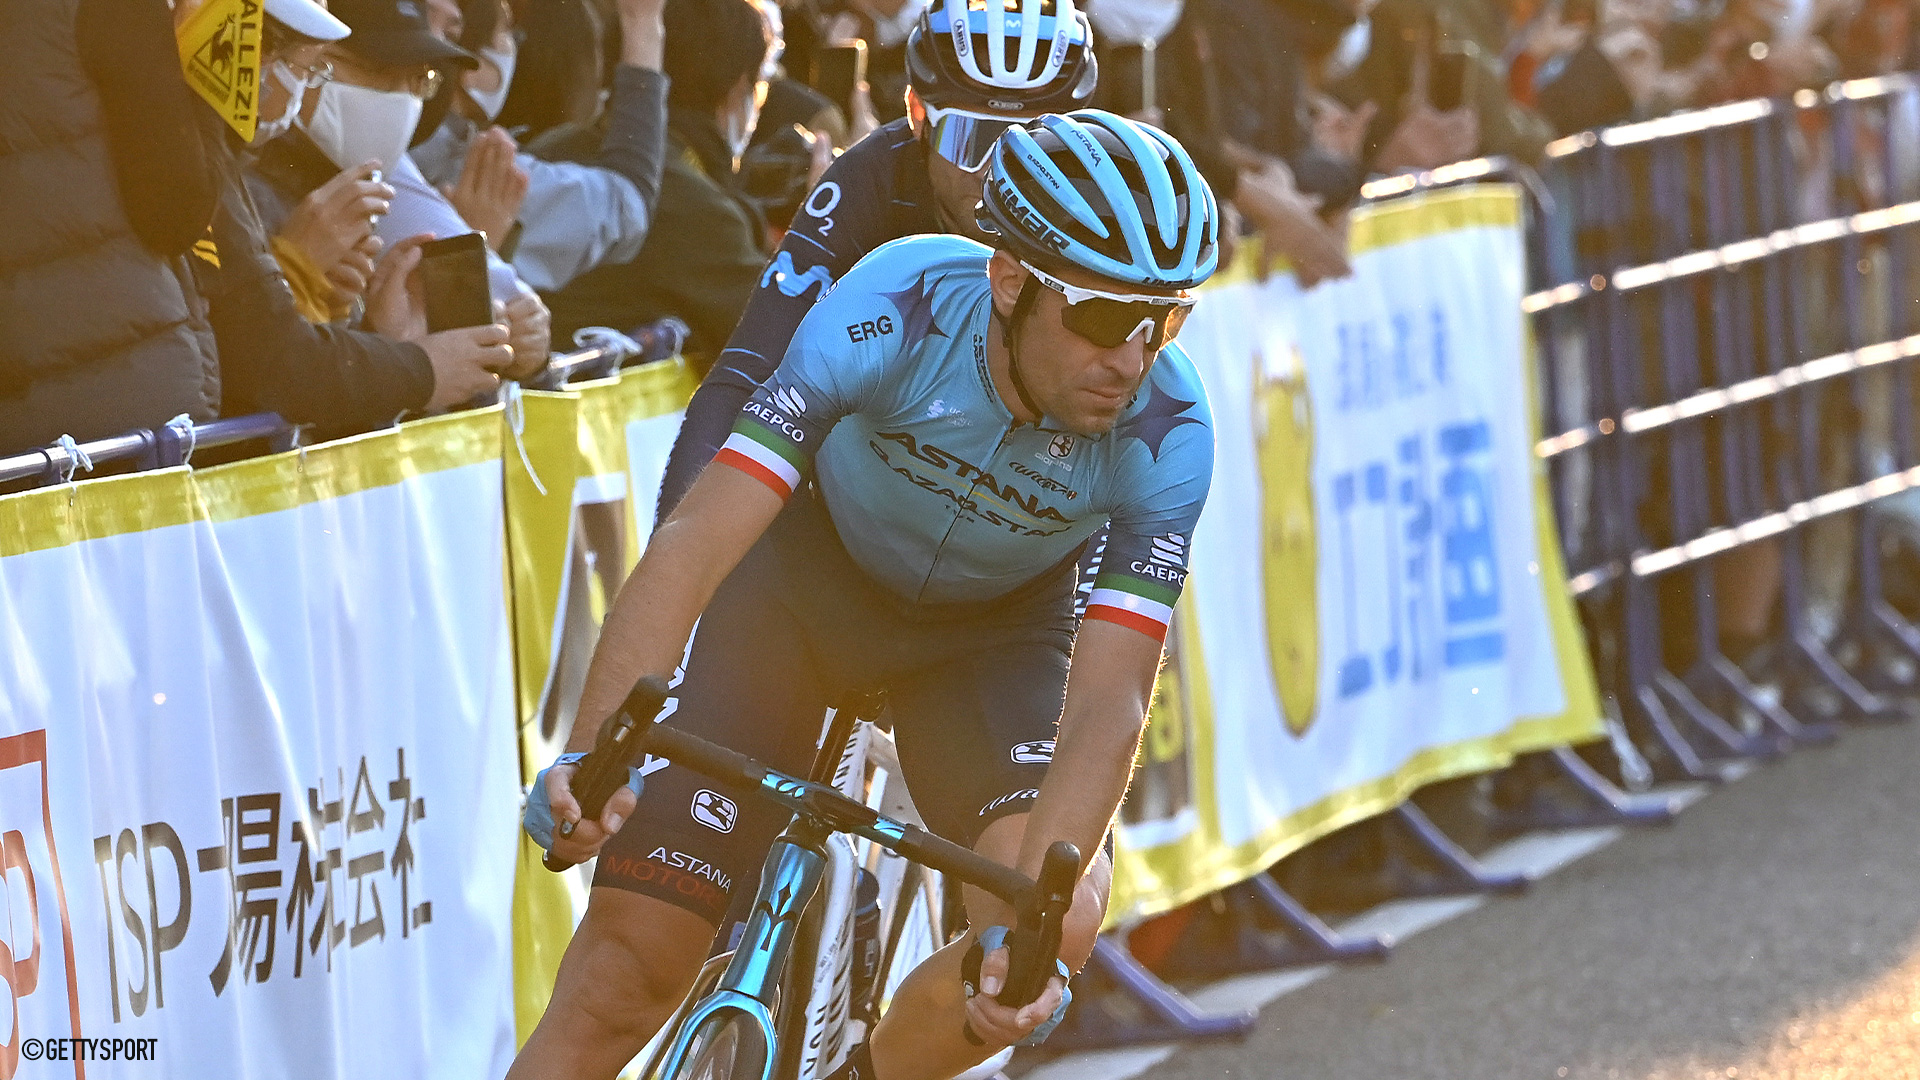 Vincenzo Nibali and the cheers of applause at the Saitama Criterium on the day professional cycling returned to Japan.